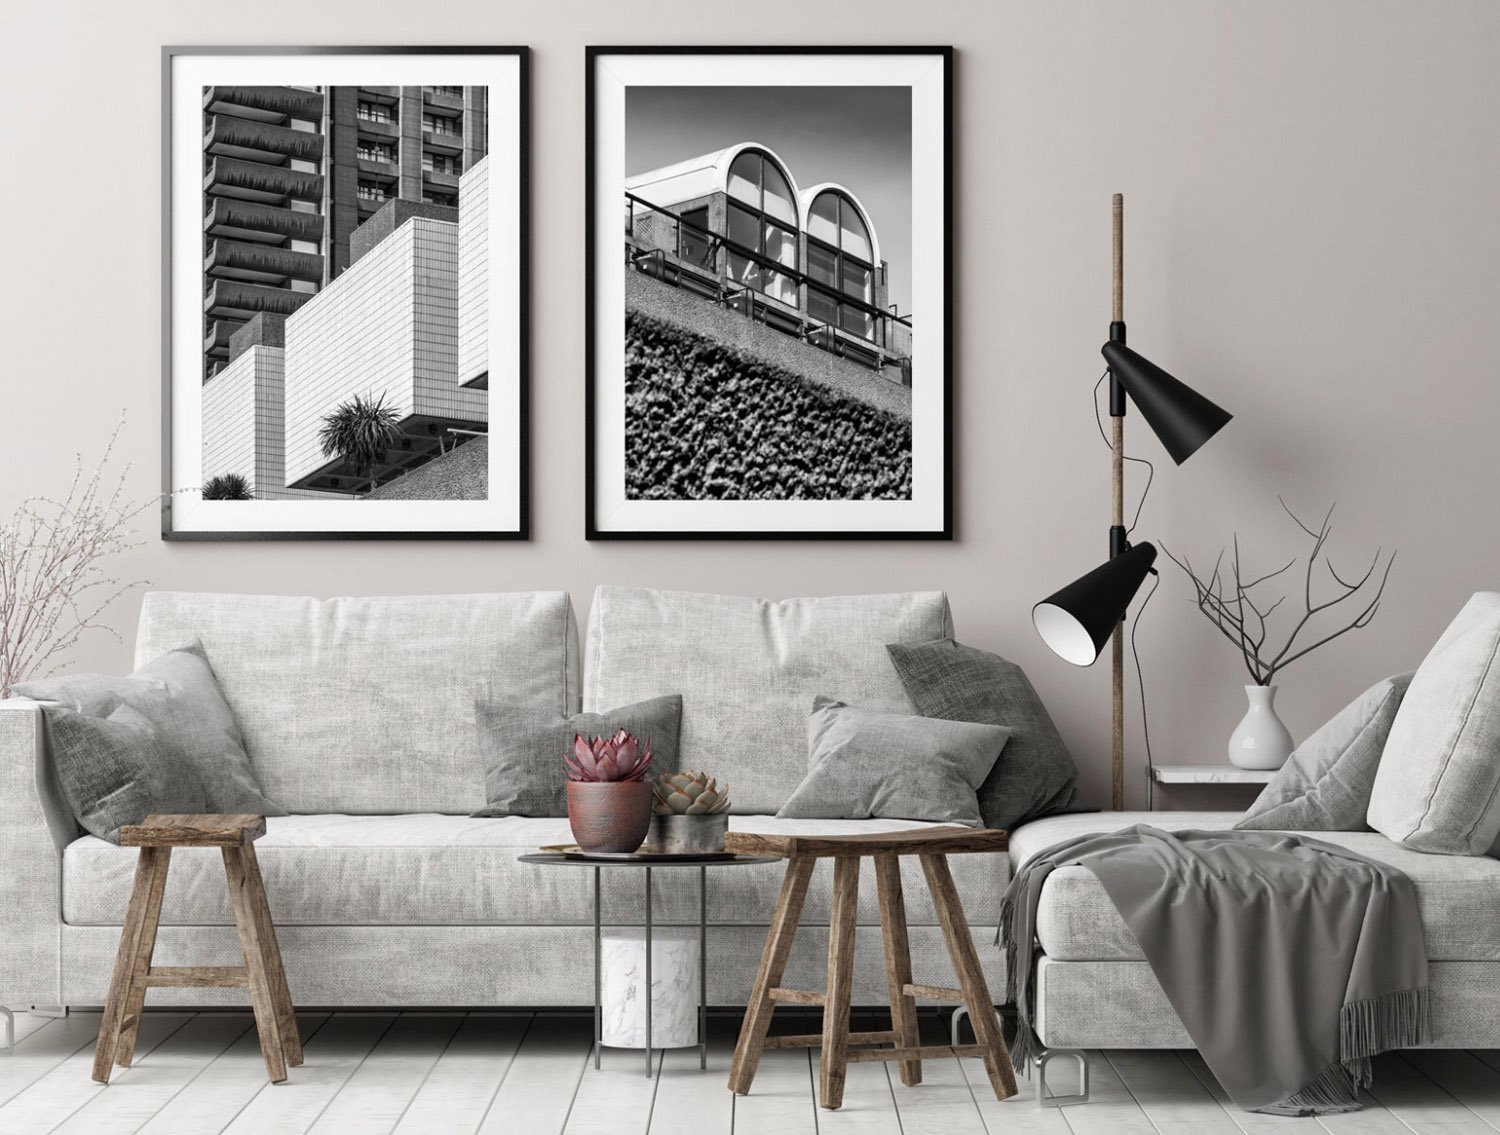  Fine art prints of the Barbican Estates Brutalist for home and office spaces 